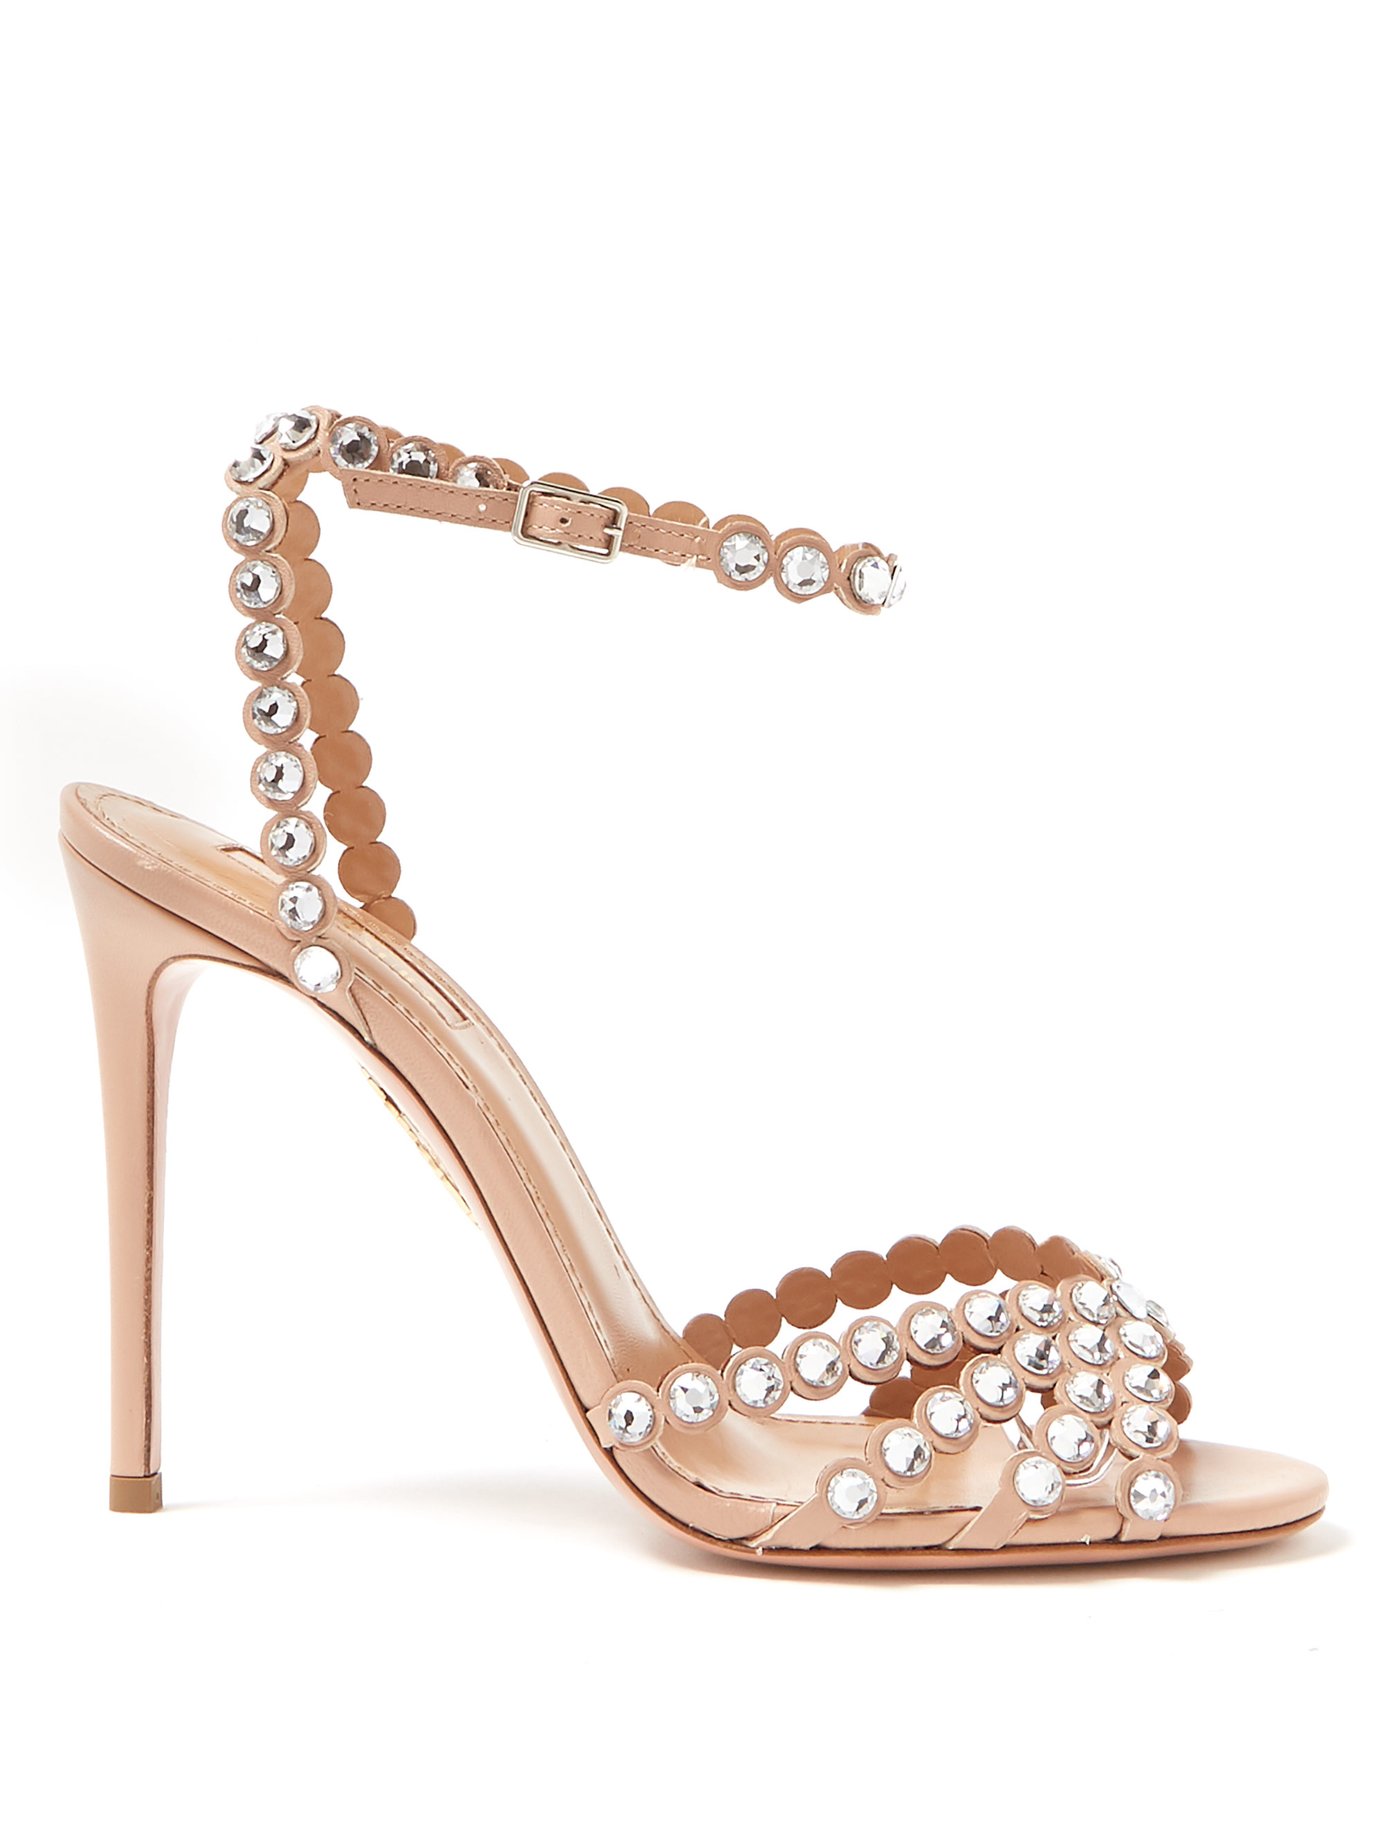 17 Nude Wedding Shoes Perfect for Any 